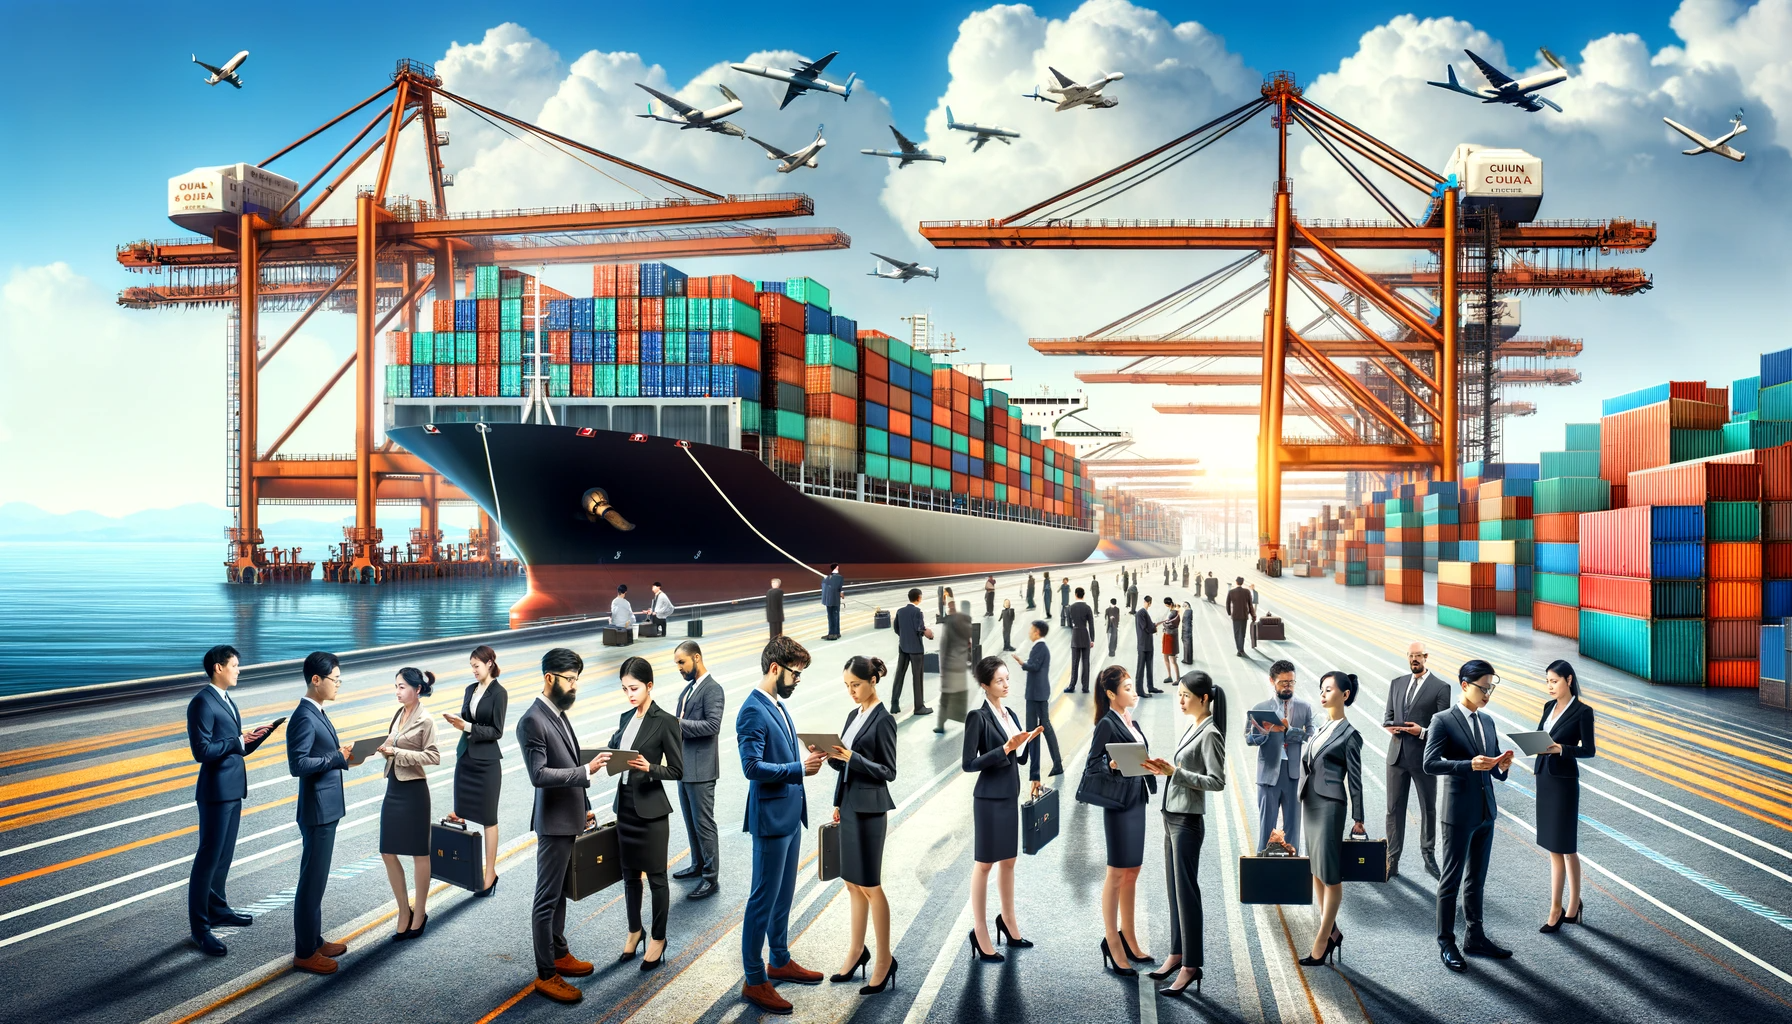 DALL·E 2023-12-14 10.39.21 - A bustling port in China in 2023, showcasing containers with 'Made in China' labels being loaded onto a large cargo ship. In the background, cranes an